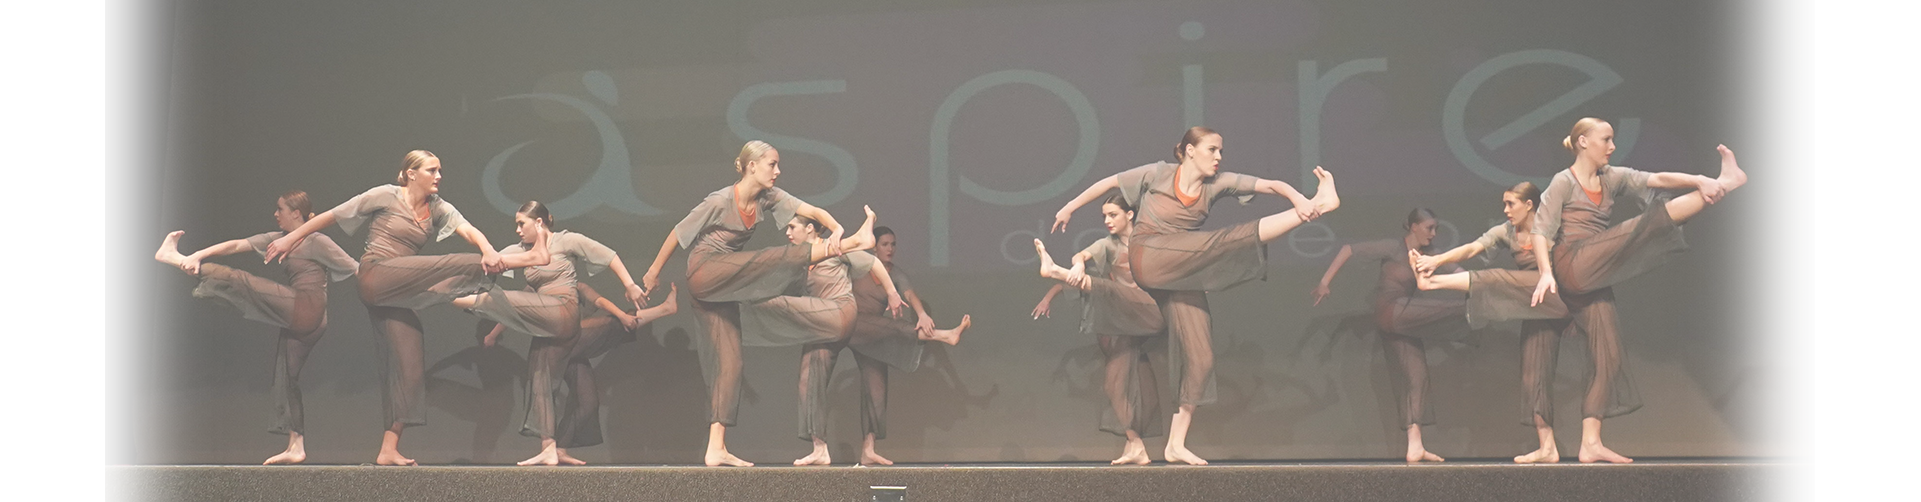 C & C Ballet at Aspire Dance Pro Competitions